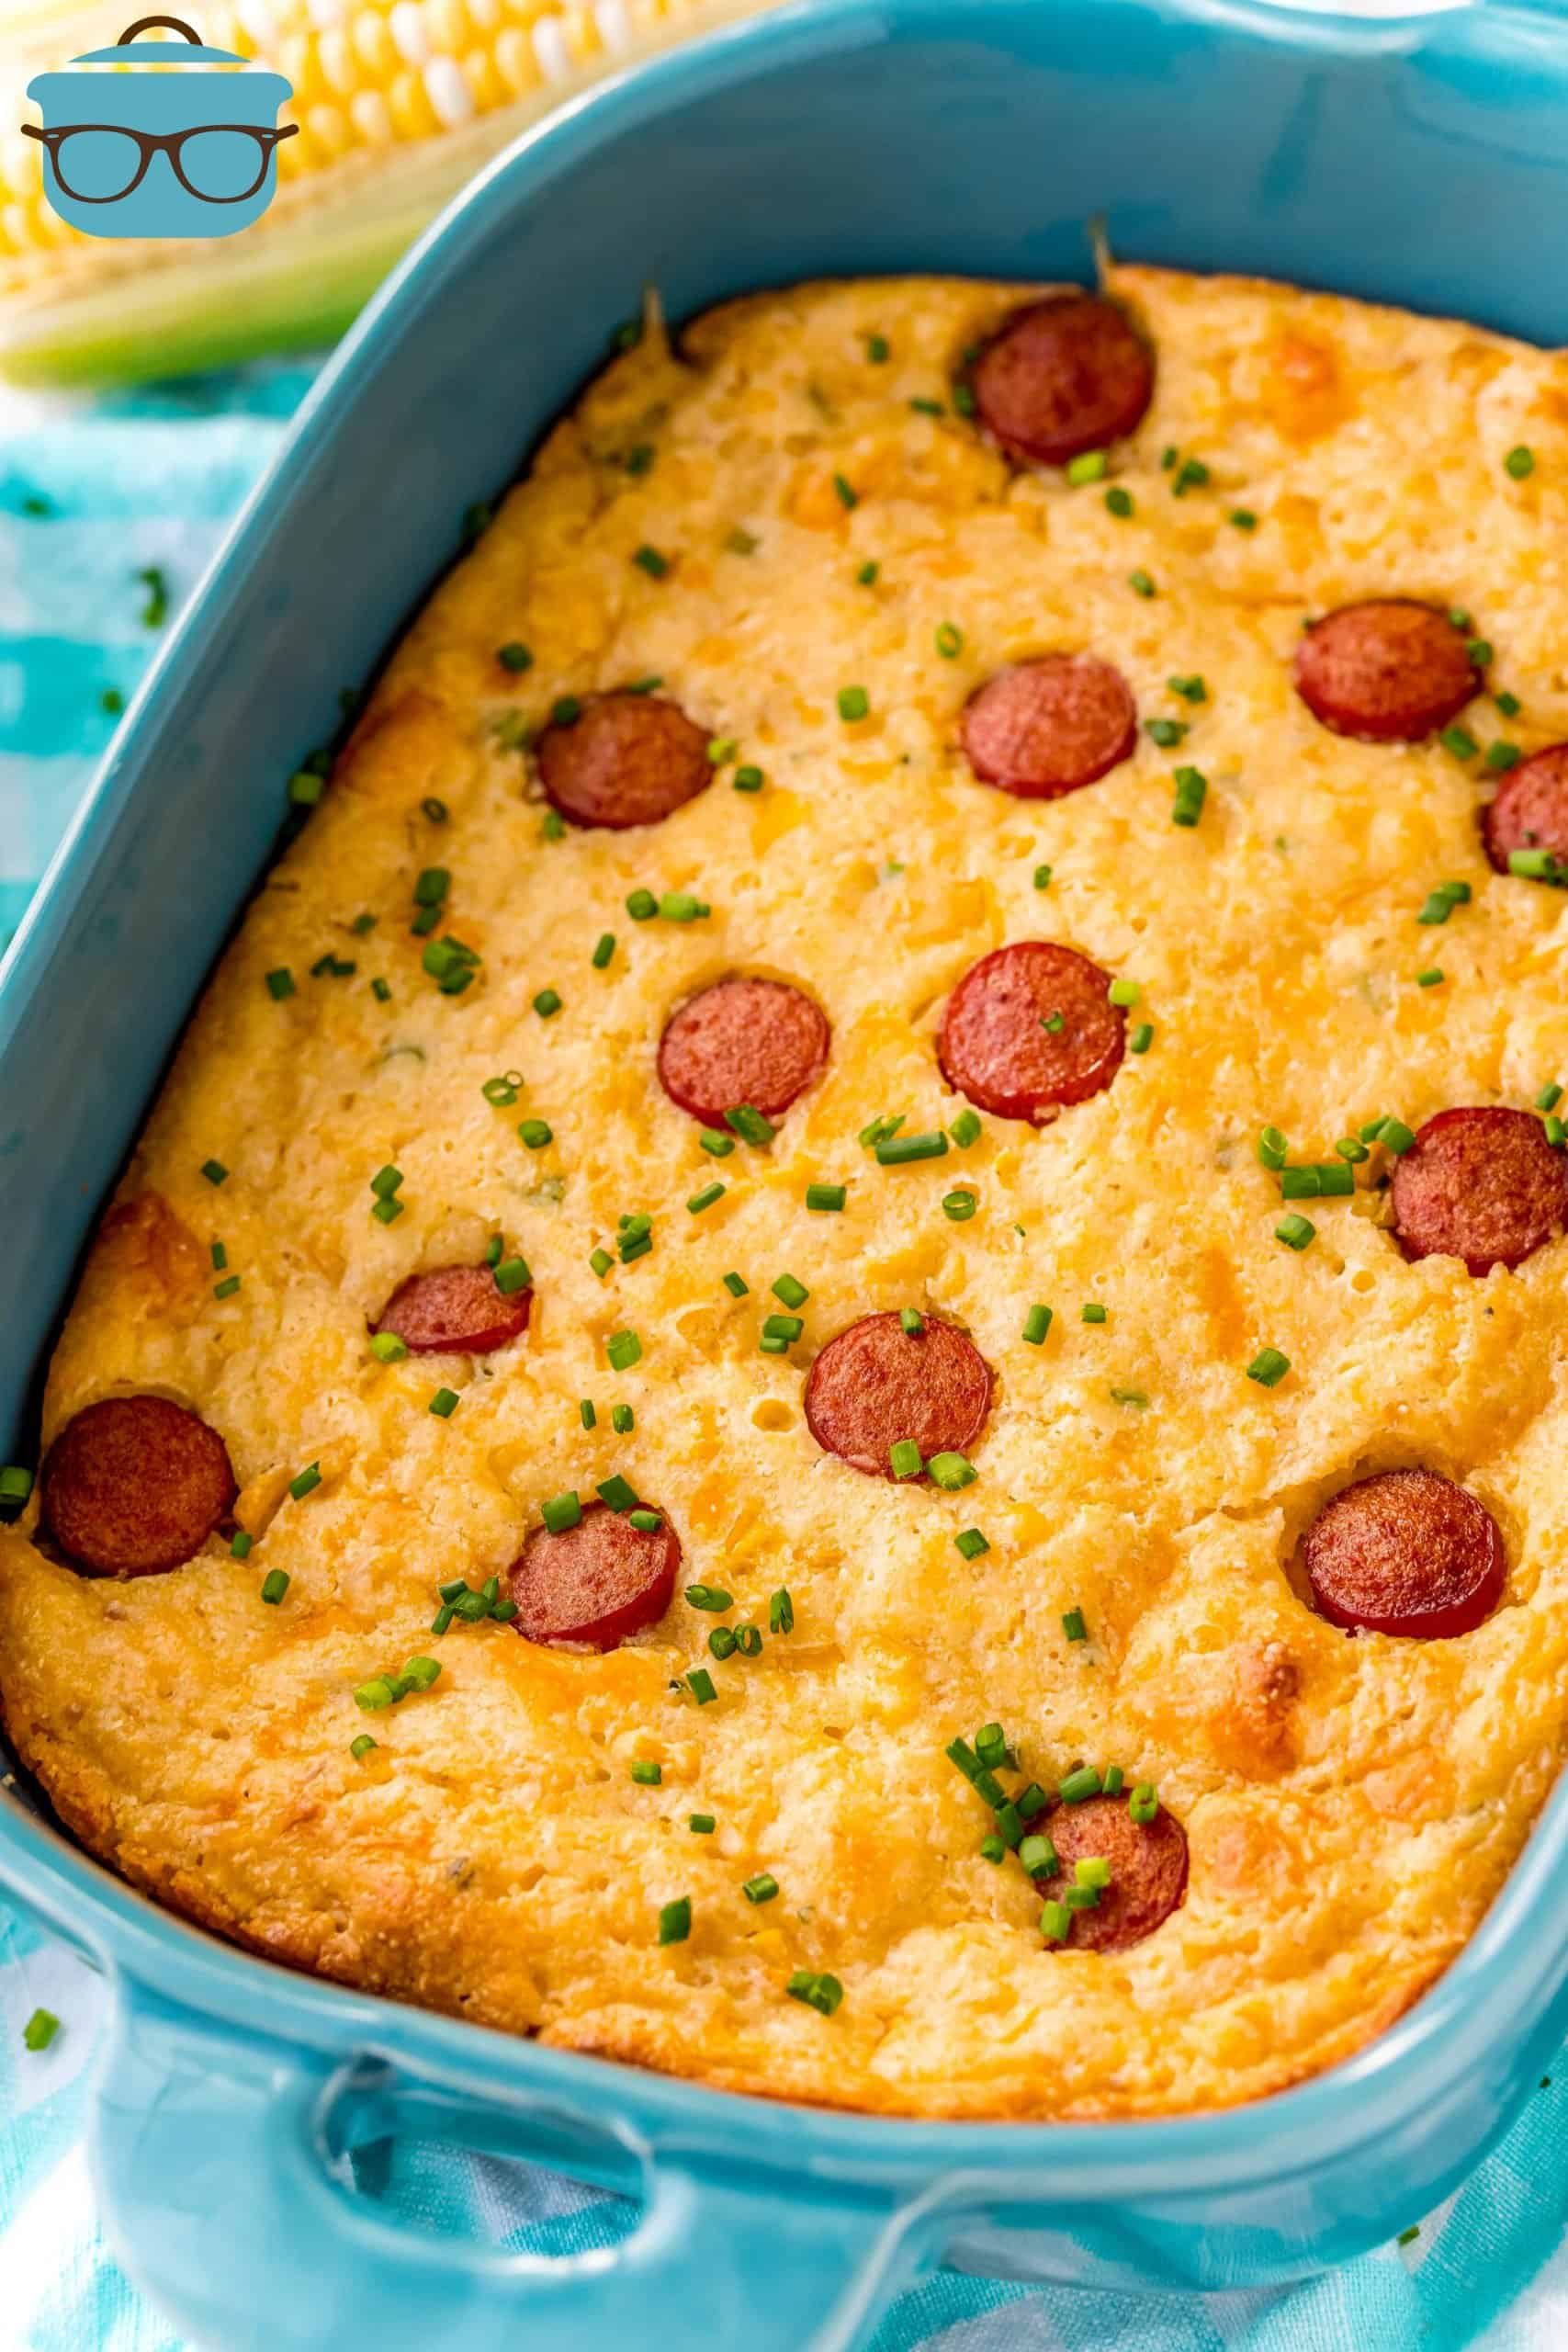 fully baked Hot Dog Corn Casserole in a teal baking dish.